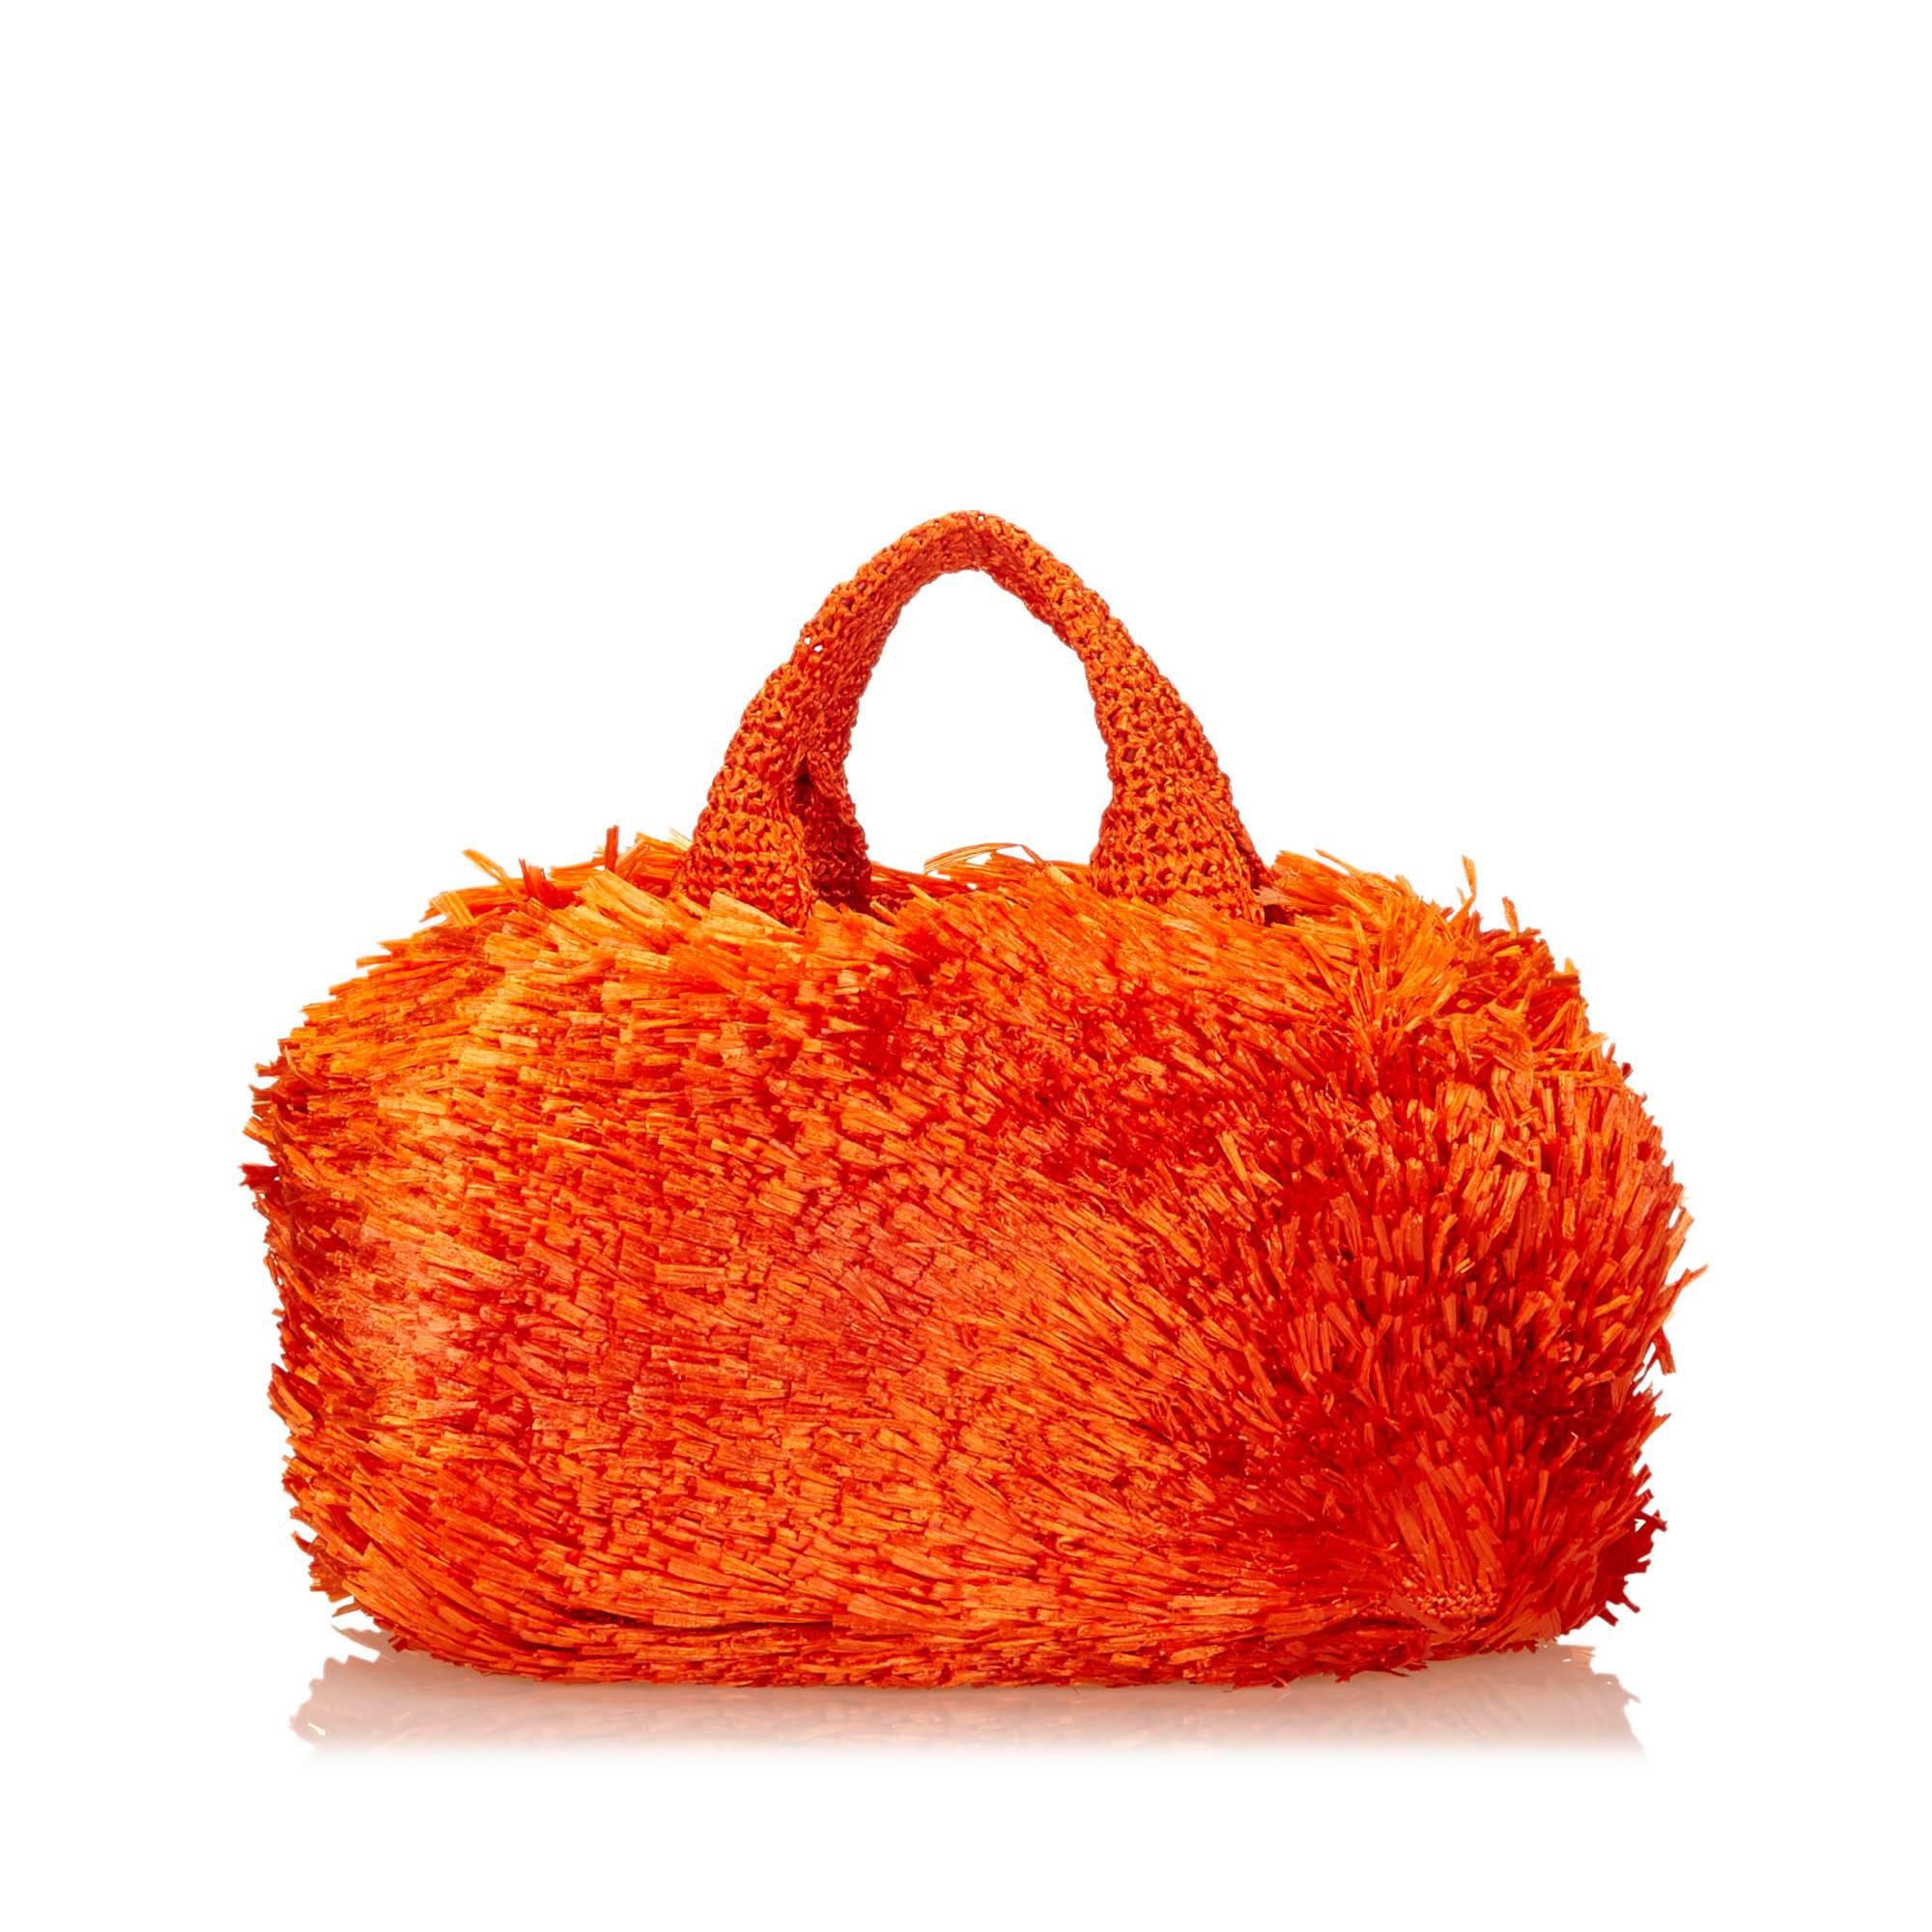 Product details:  Orange raffia handbag by Prada.  Top woven carry handles.  Open top.  Lined interior with inner zip and slide pockets.  15